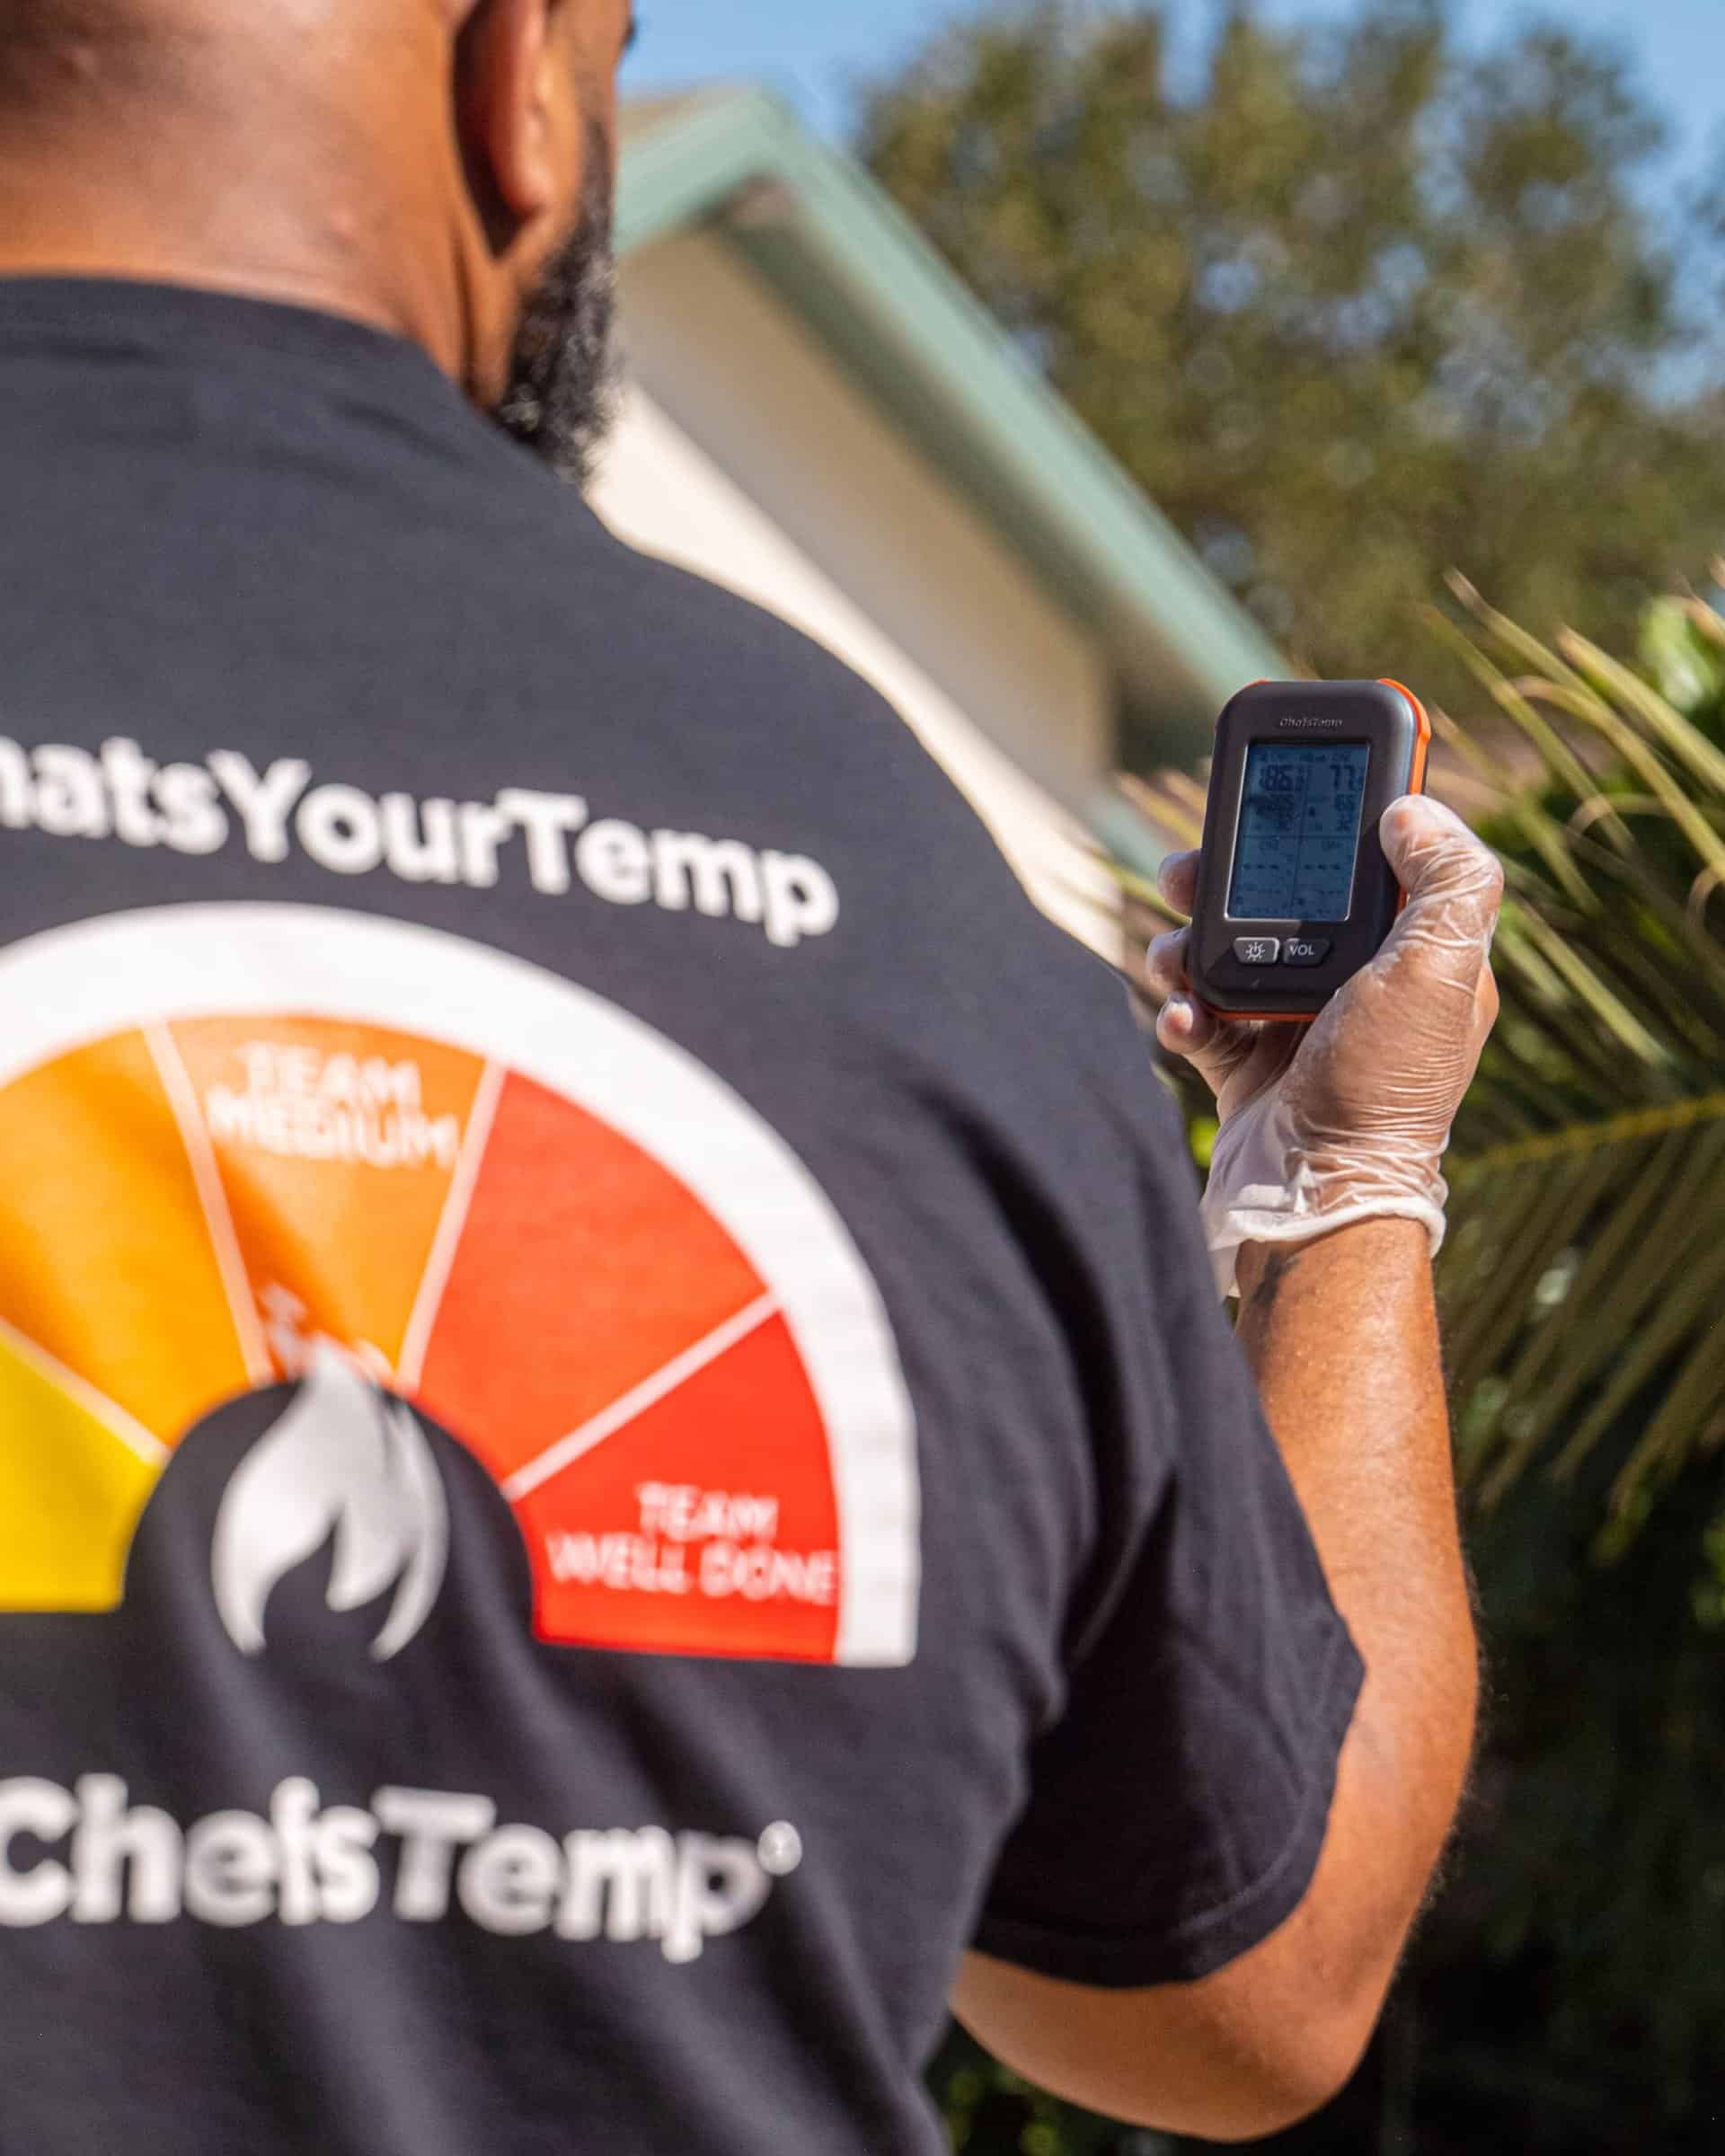 chefstemp_wireless_meat_thermometer_03